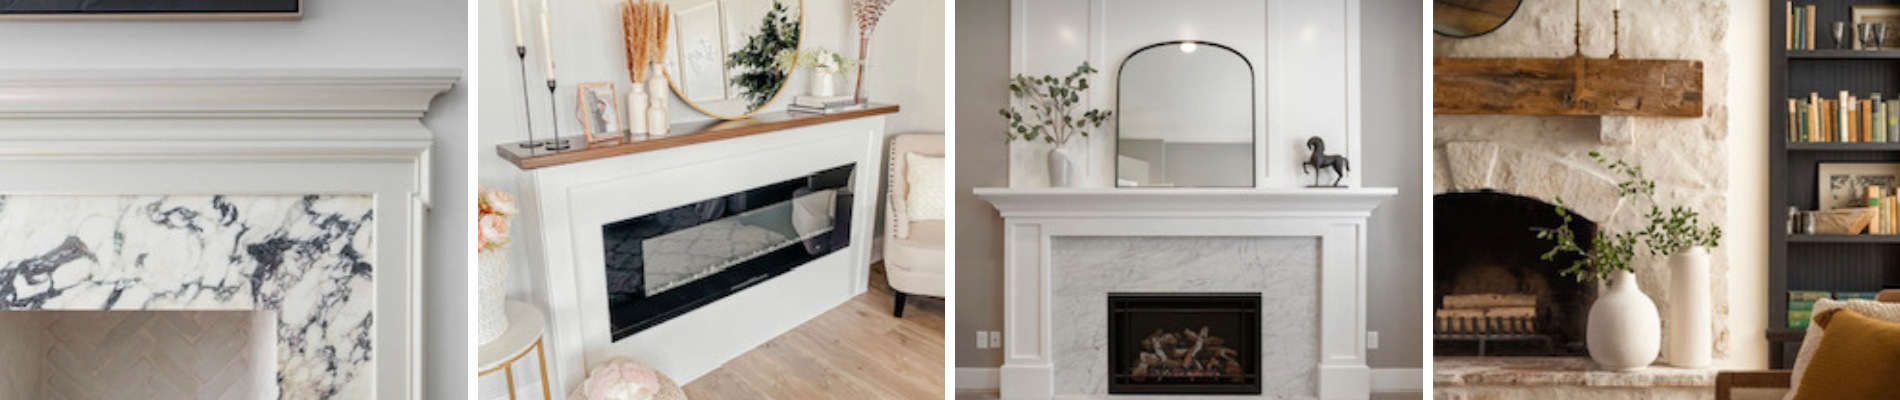 Decor Trends: Fireplaces